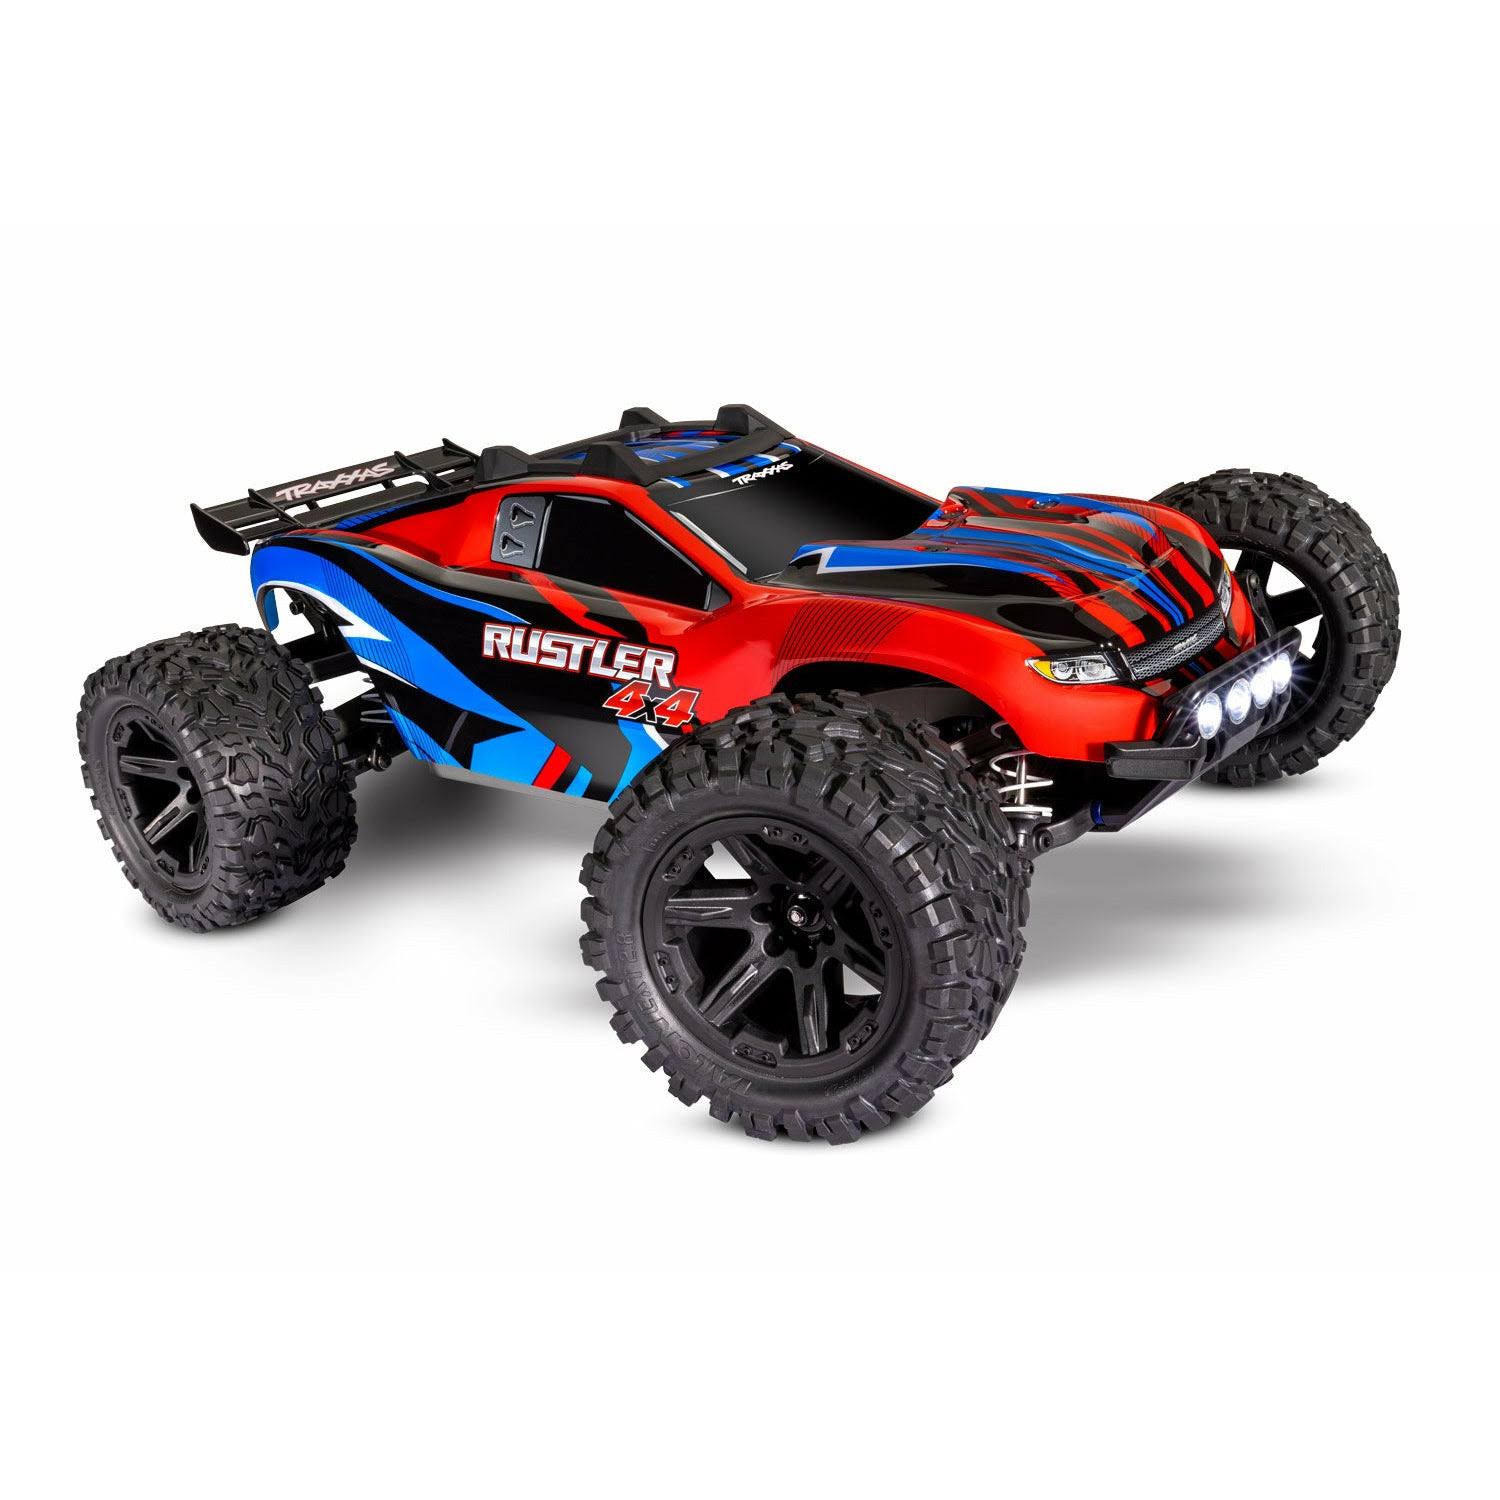 Traxxas 1/10 Rustler 4x4 With LED Lights Red